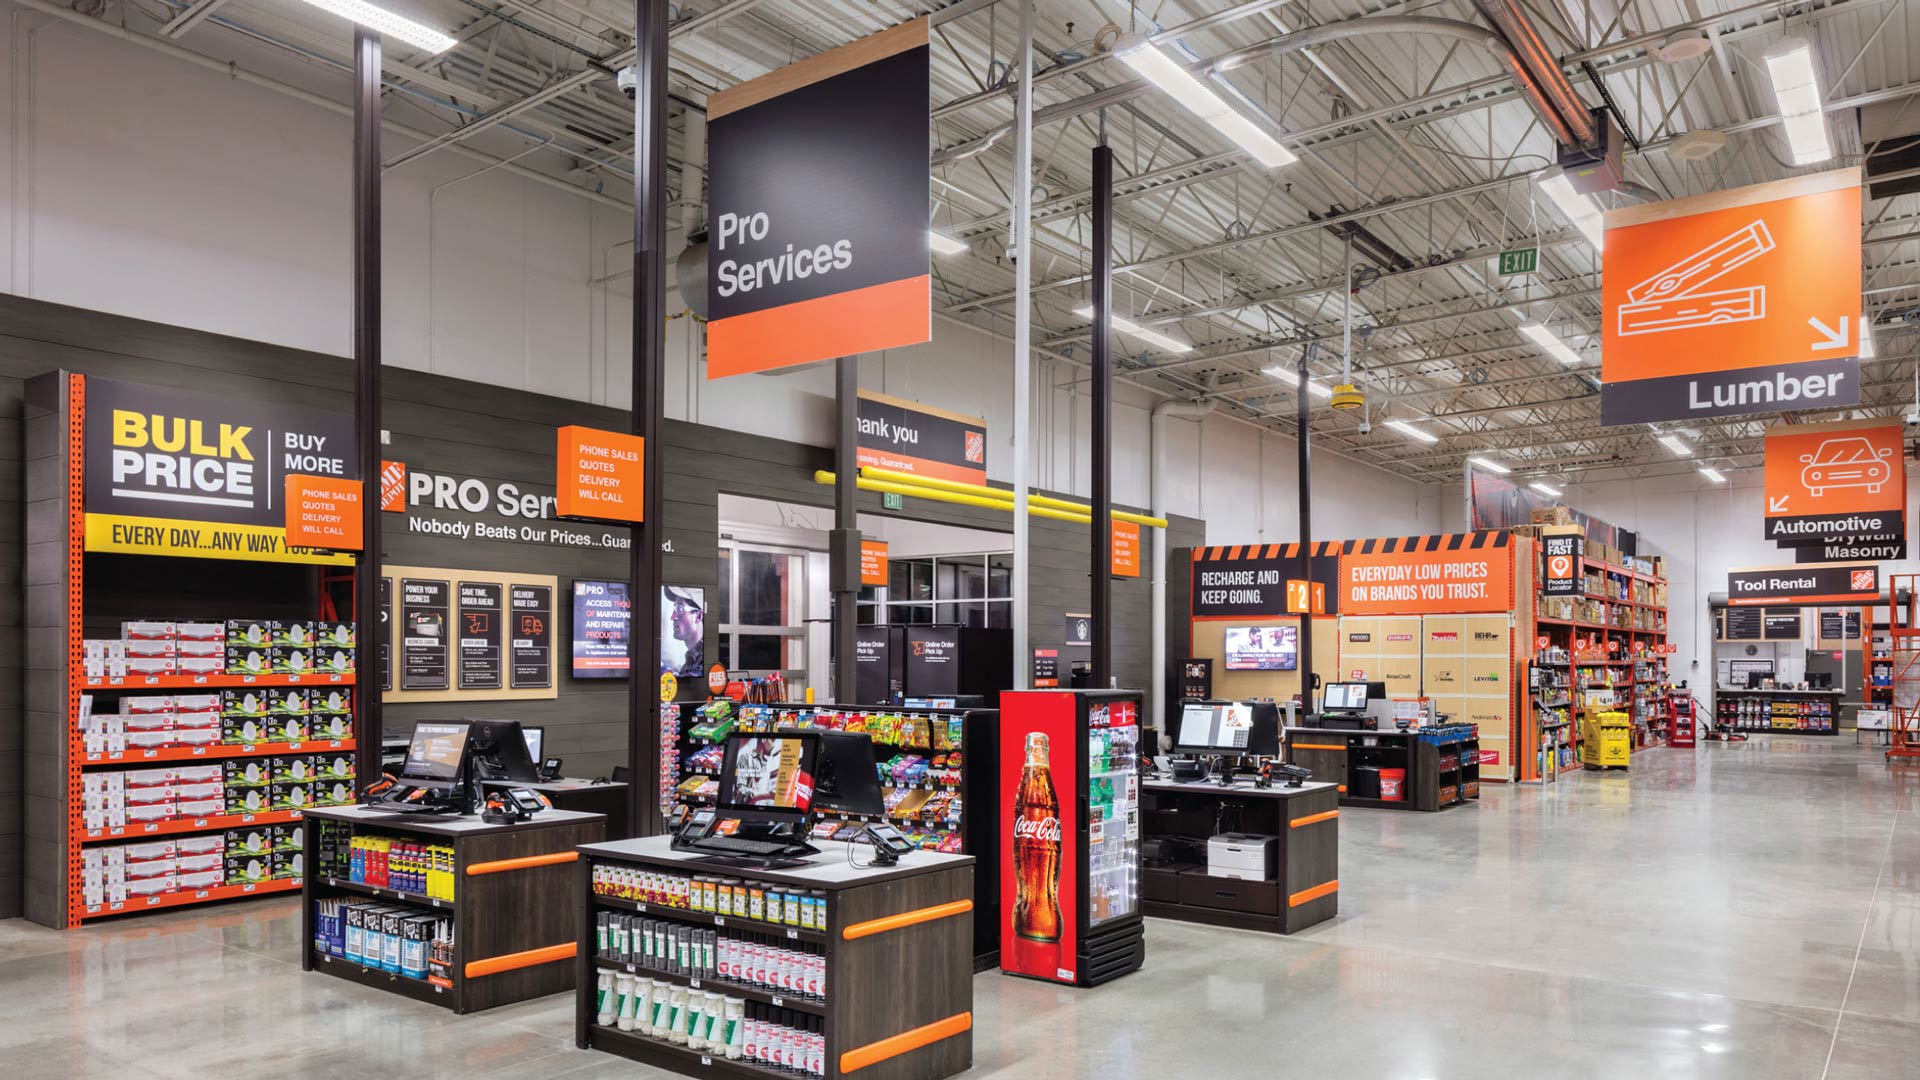 the home depot case study